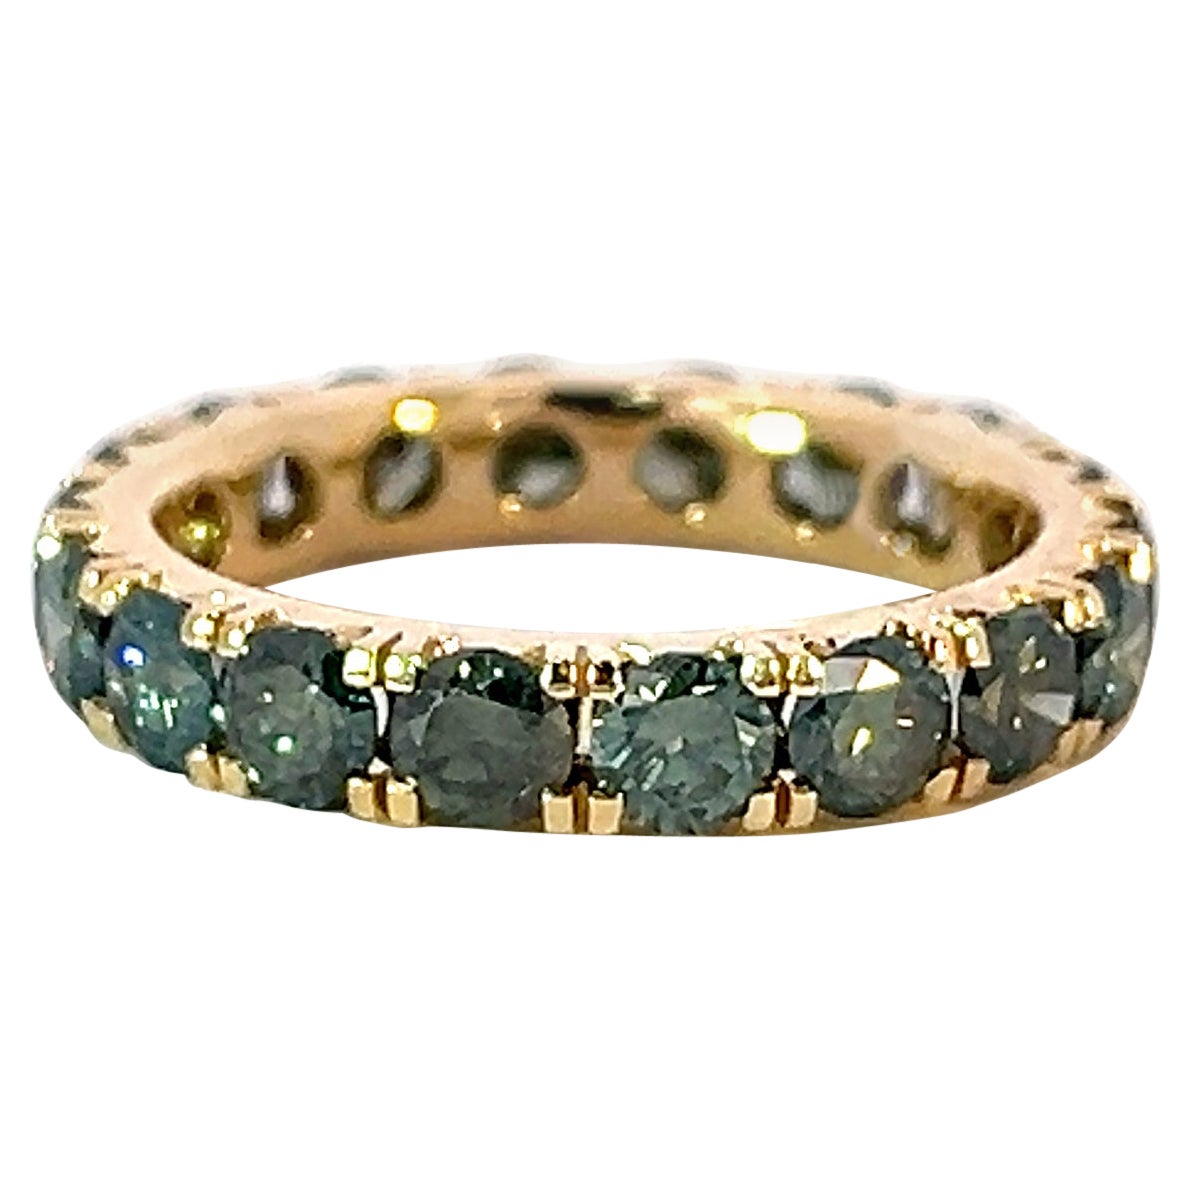 Rare Classic 14k Yellow Gold 3.02 Carat Teal Green Diamond Eternity Band Ring For Sale